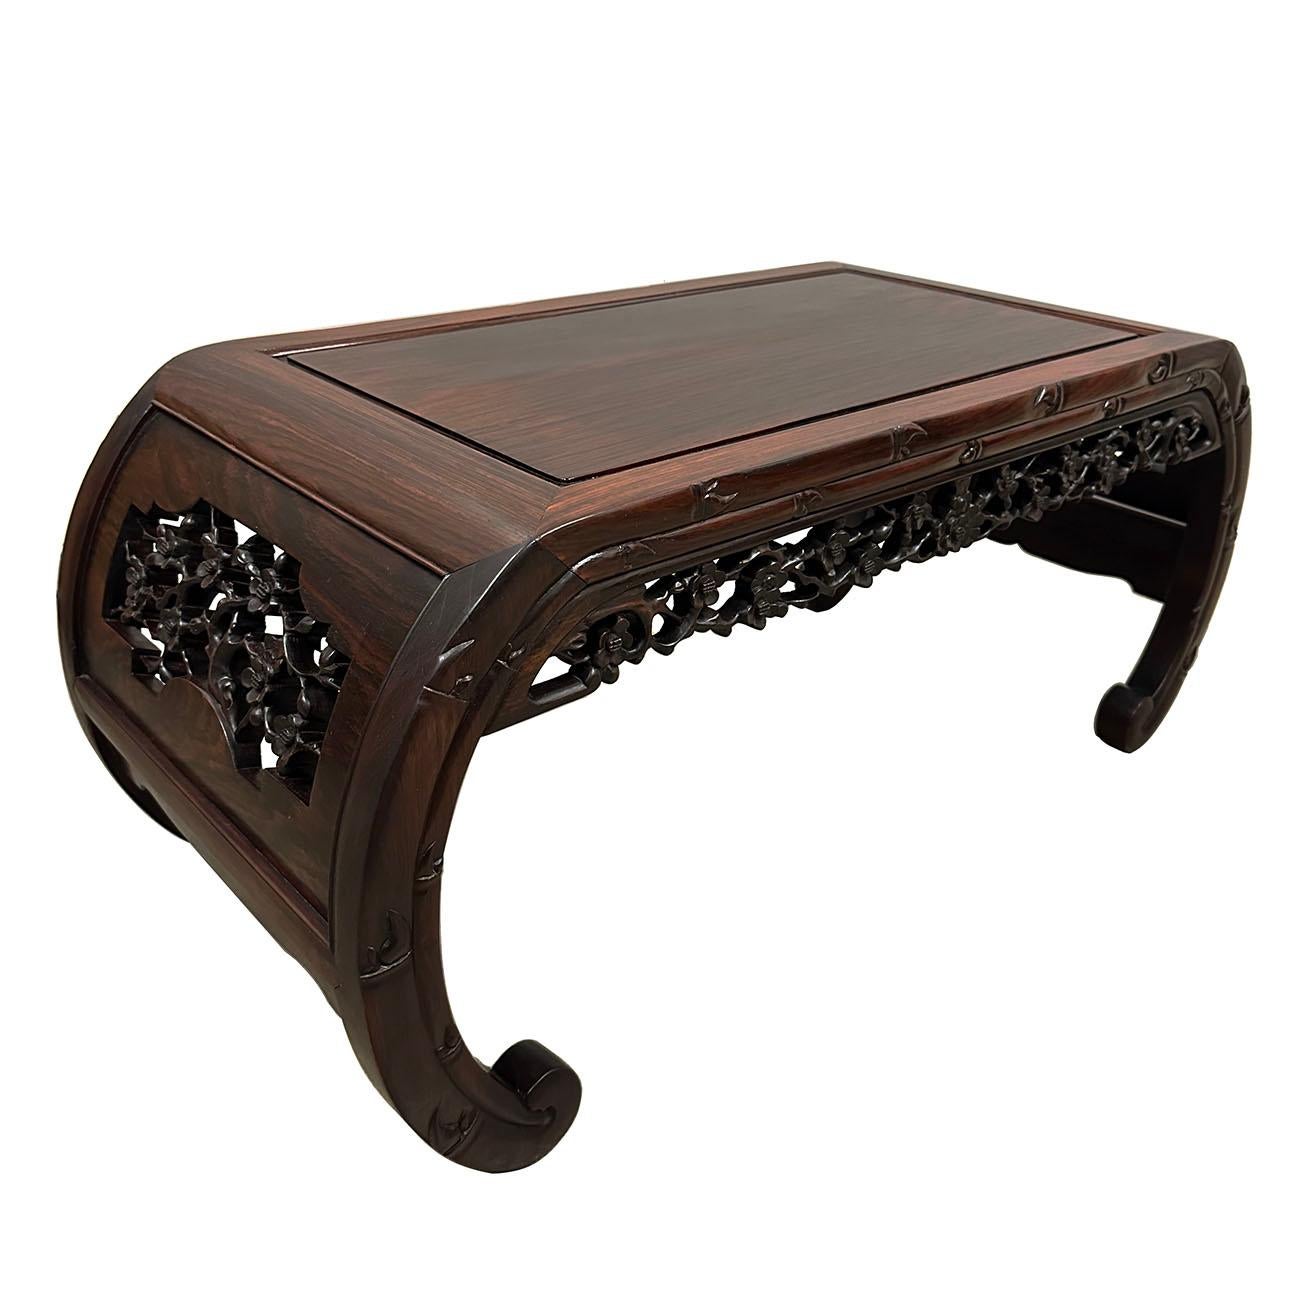 

This beautiful carved Coffee Table is made from solid Rosewood with some traditional Chinese carving works all around four sides with banana legs. It has intricate carving works of cherry blossom on four sides of the table. Look at the pictures,